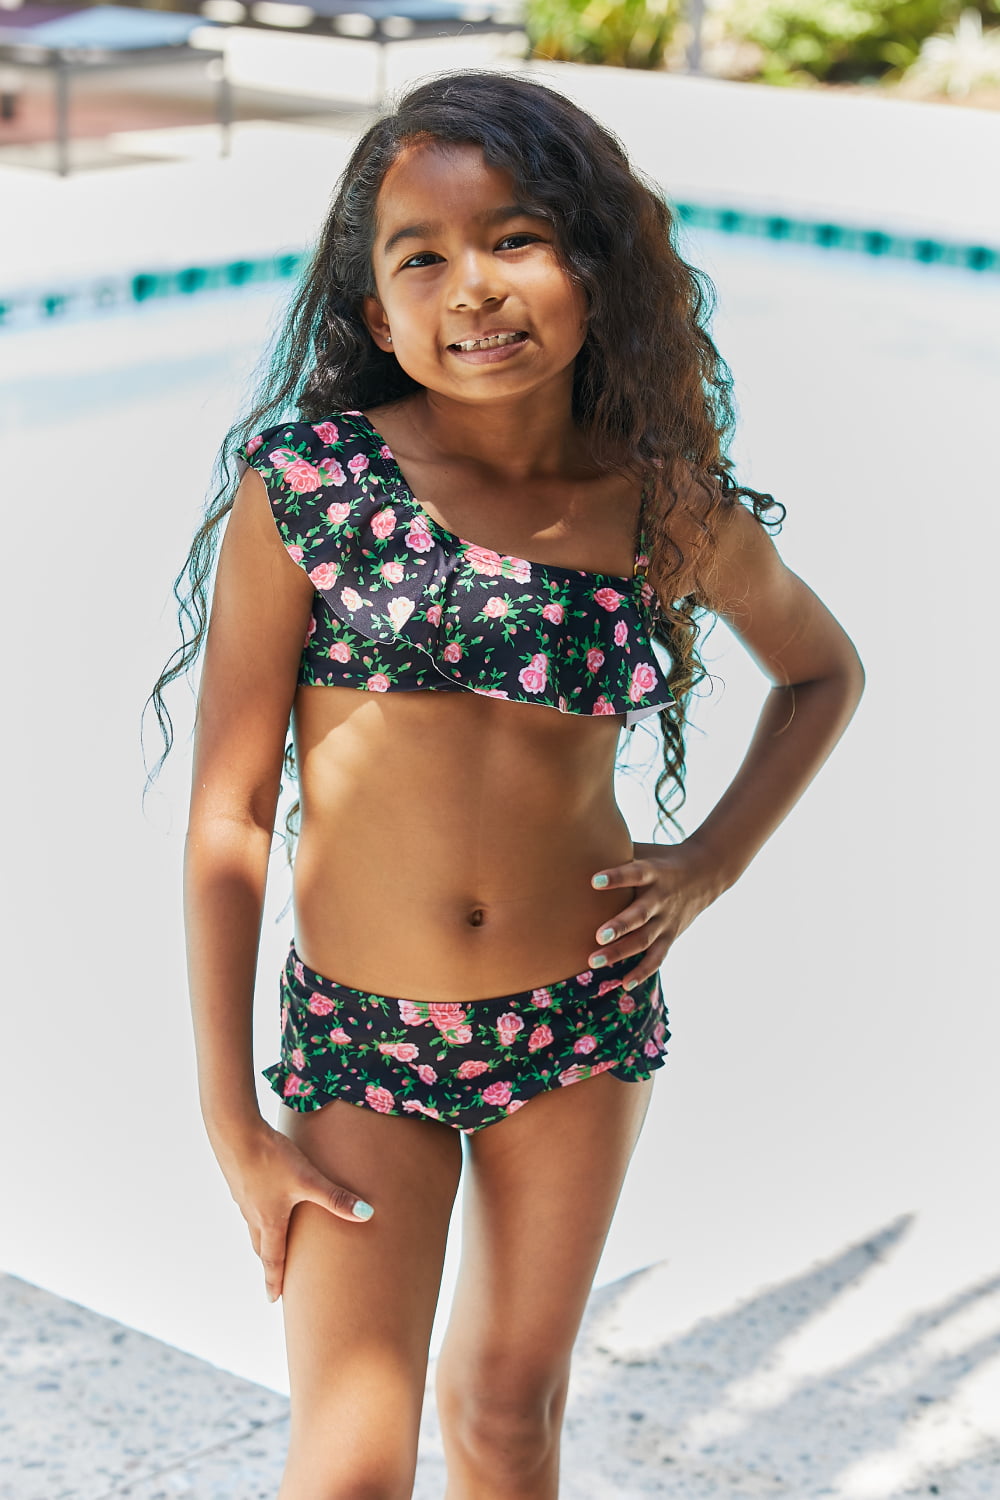 Girl's Marina West Swim Clear Waters Two-Piece Swim Set in Black Roses